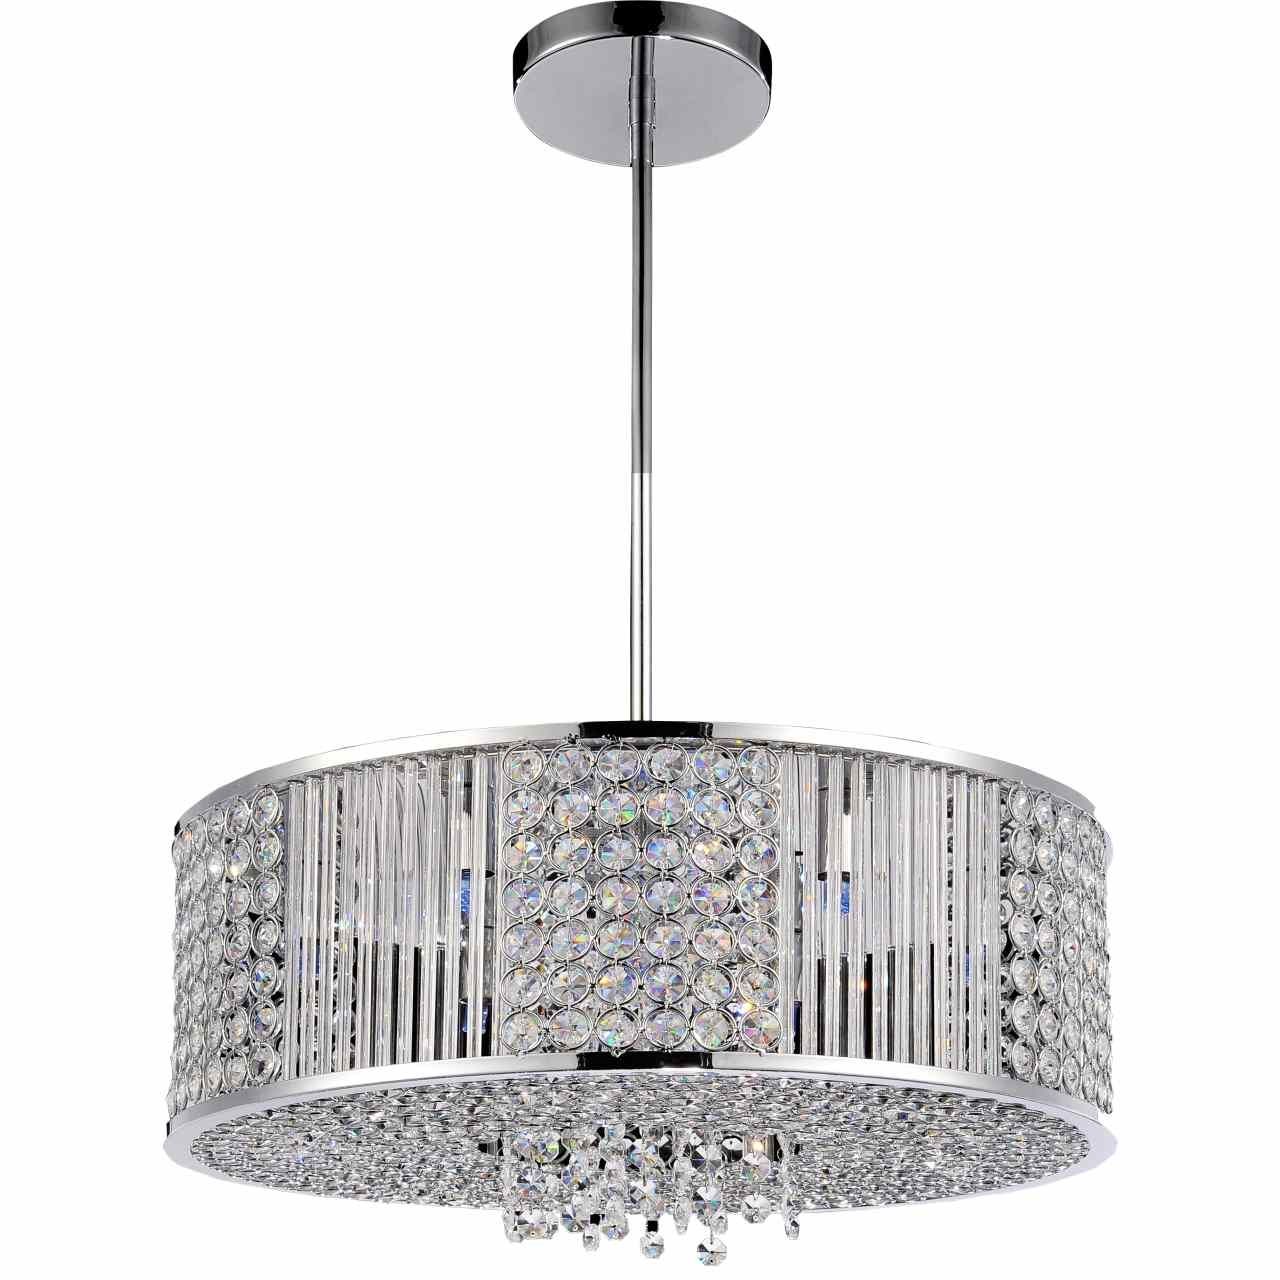 Brizzo Lighting Stores 16 Cristallo Modern Crystal Round Pendant Pertaining To Modern Chrome Chandelier (View 2 of 12)